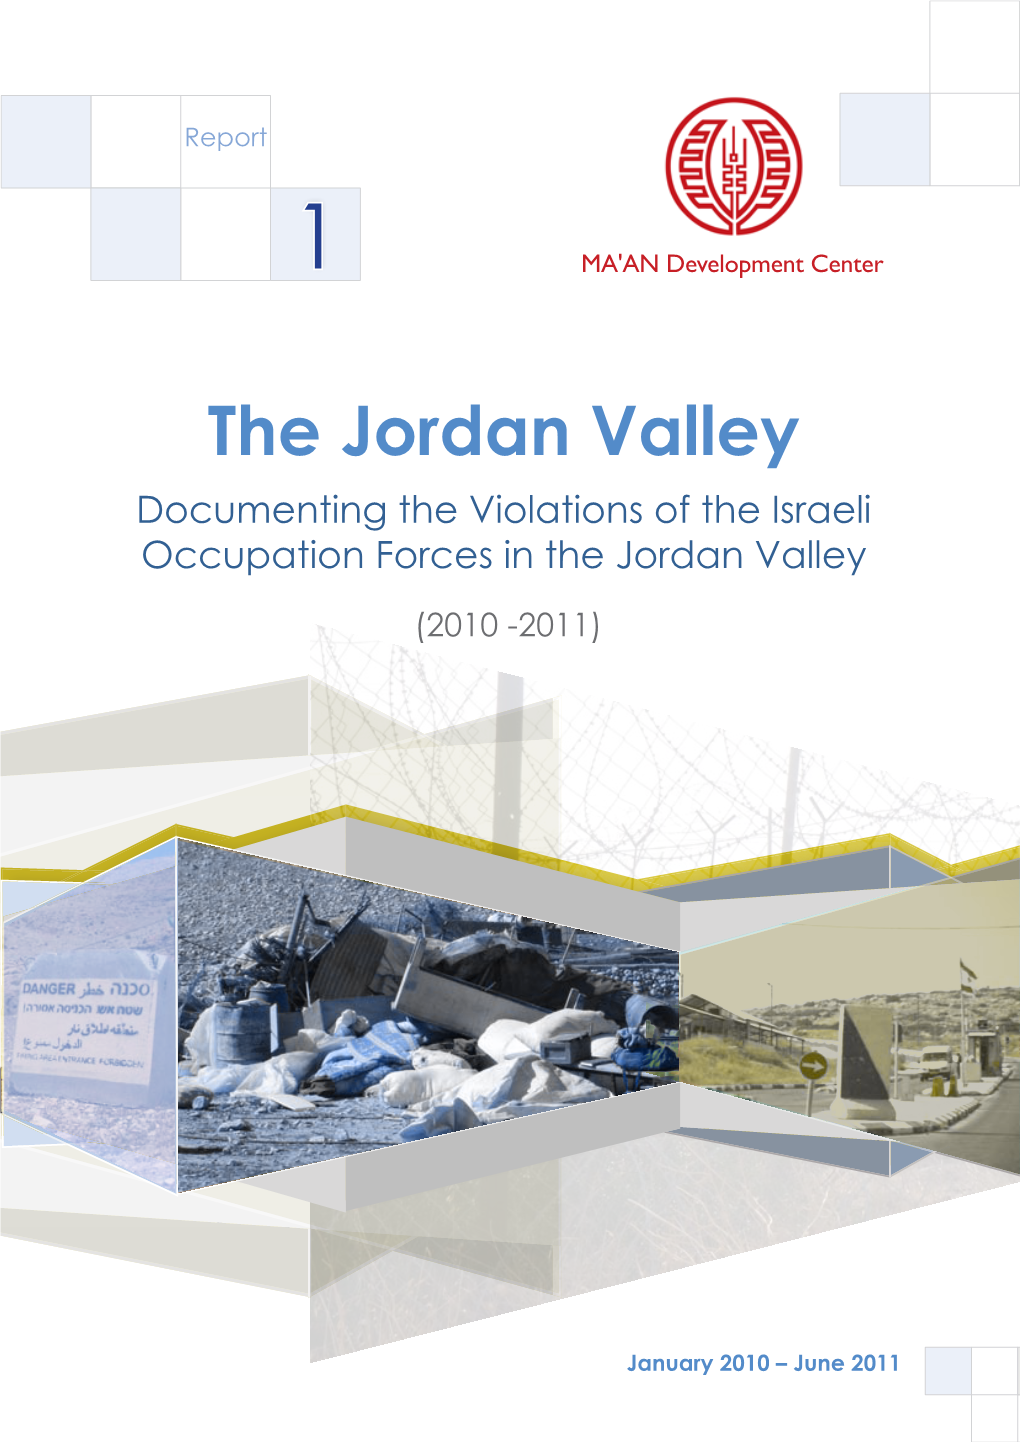 The Jordan Valley Documenting the Violations of the Israeli Occupation Forces in the Jordan Valley